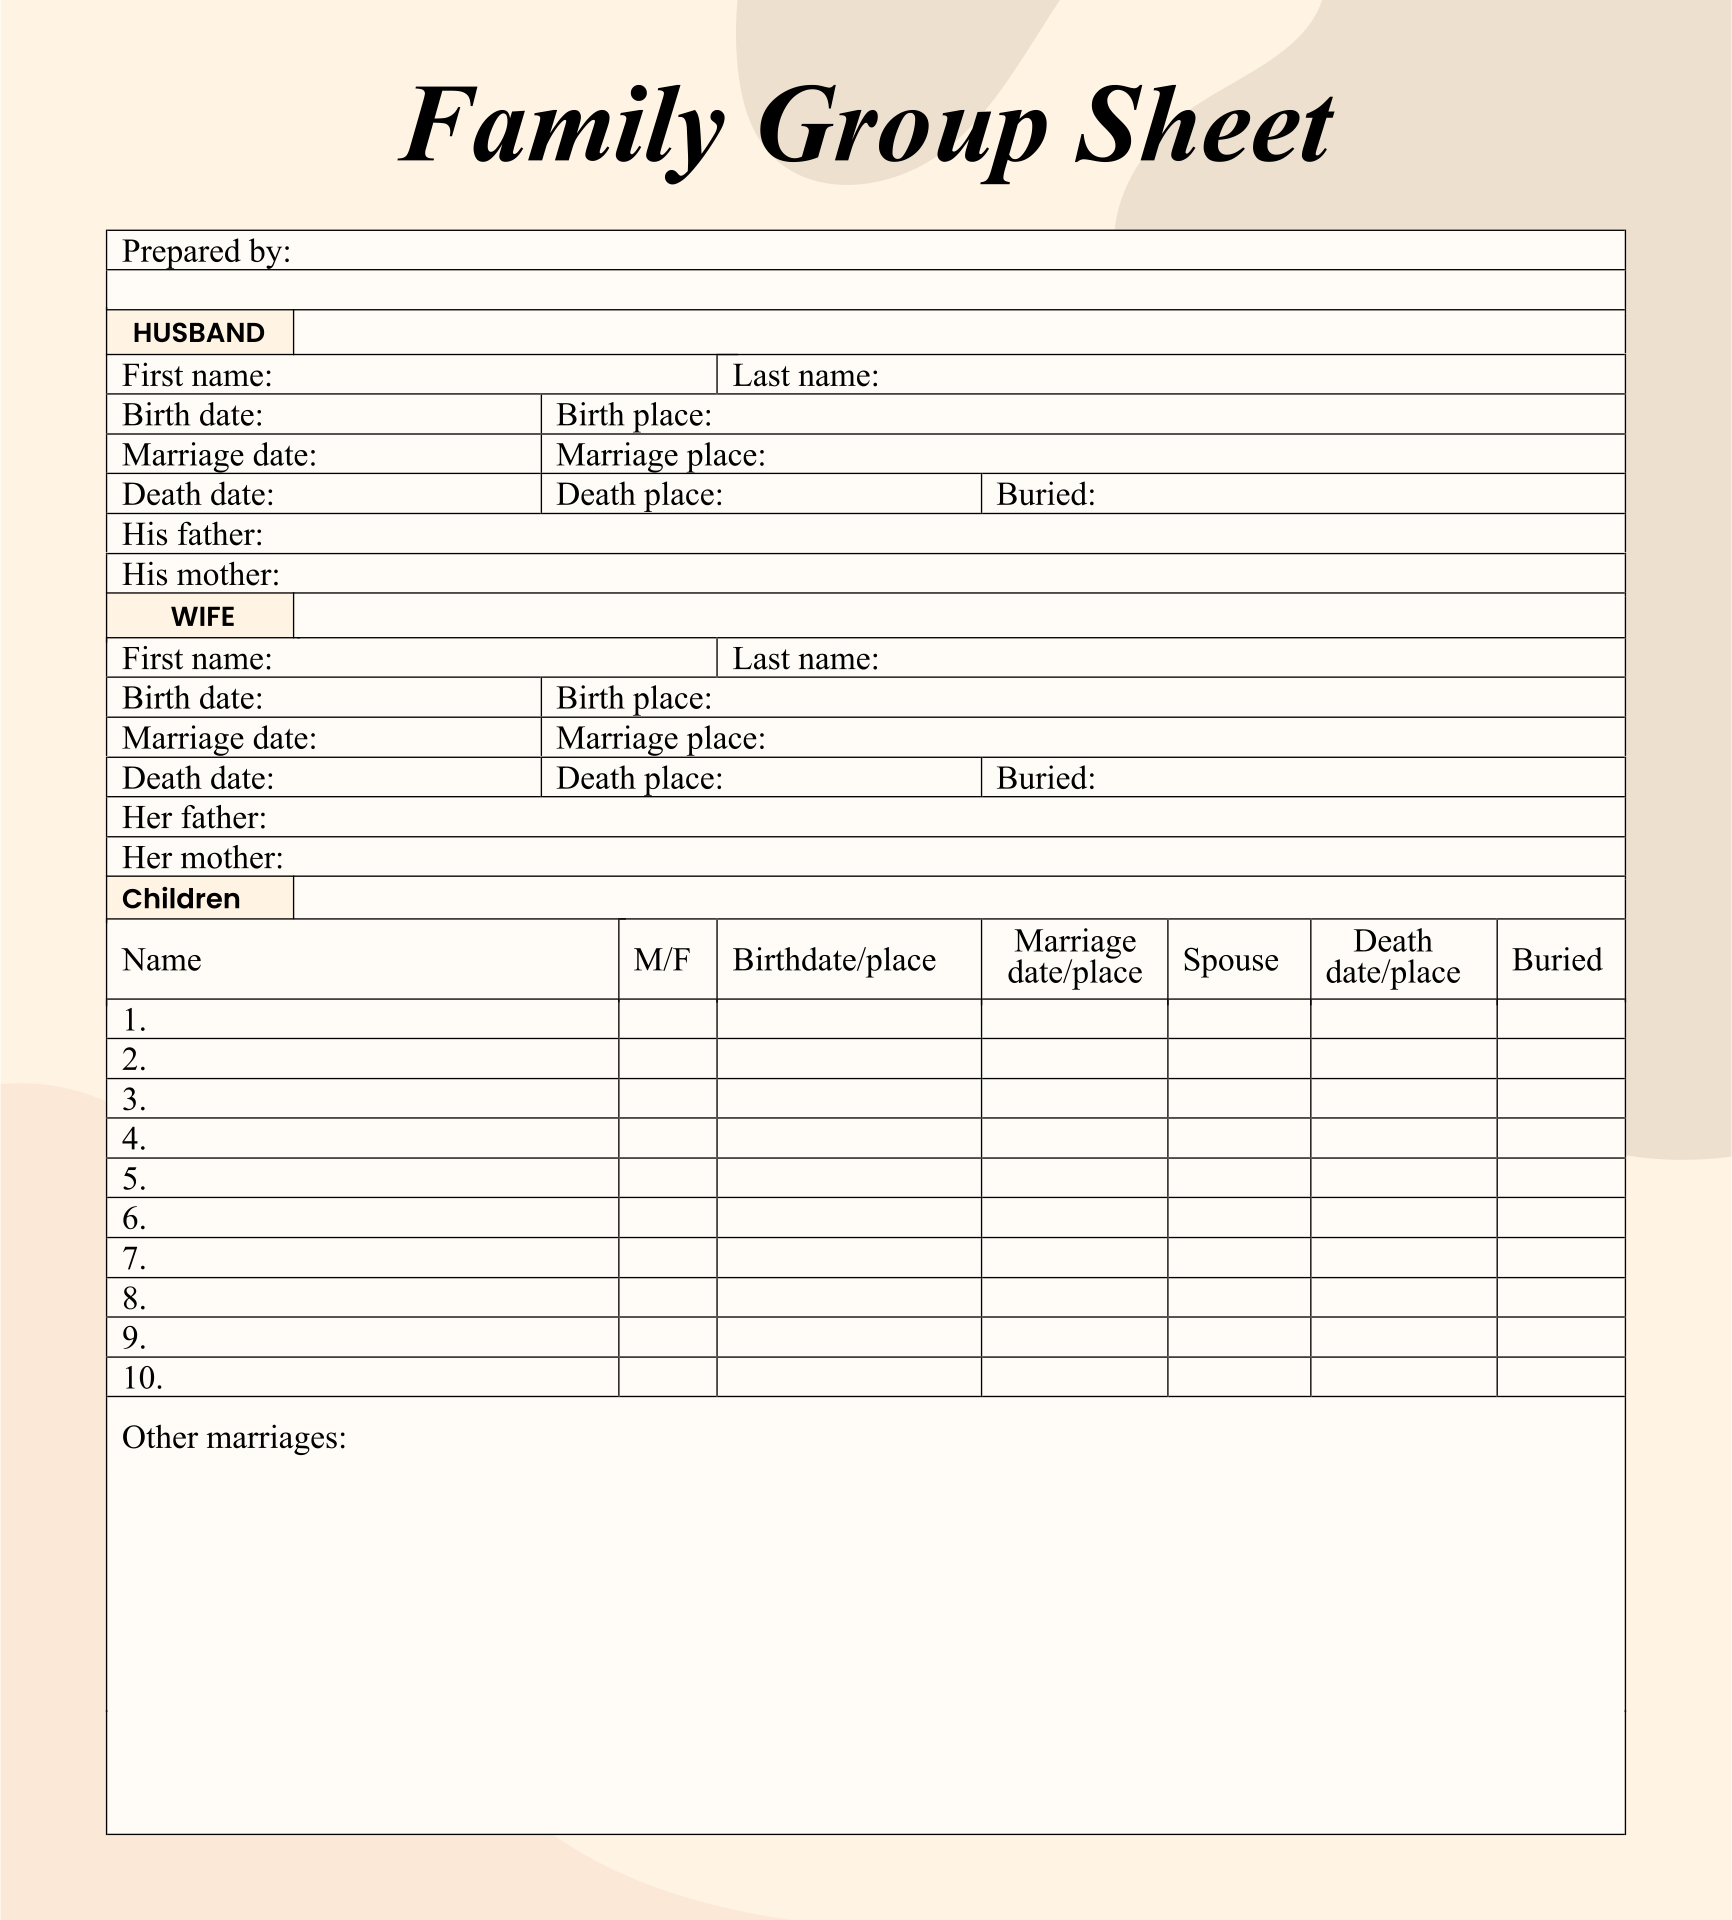 family-group-sheet-project